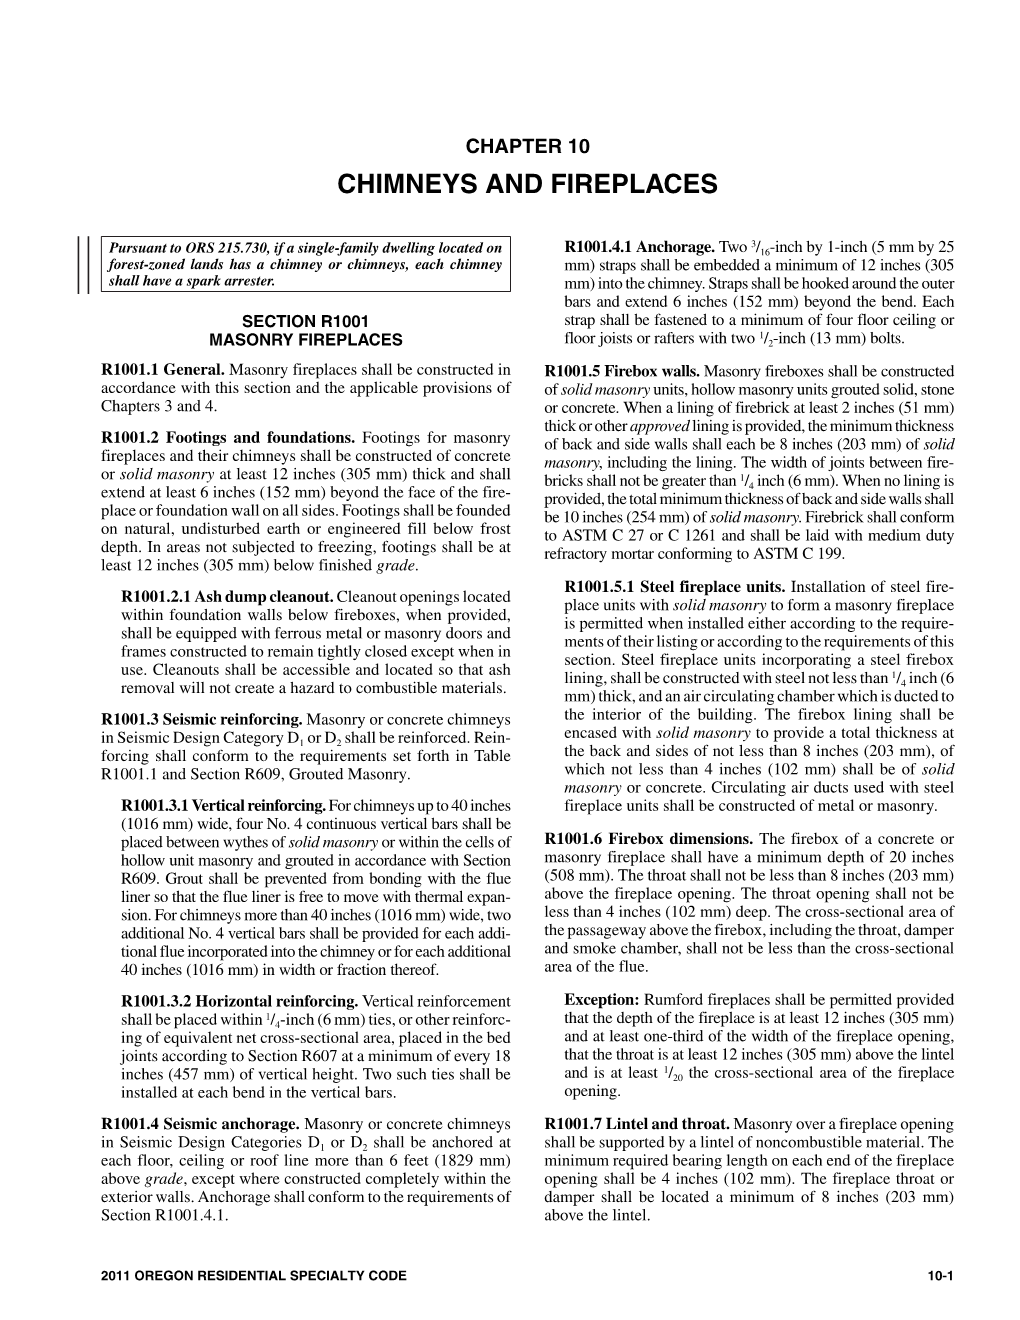 Chapter 10 Chimneys and Fireplaces